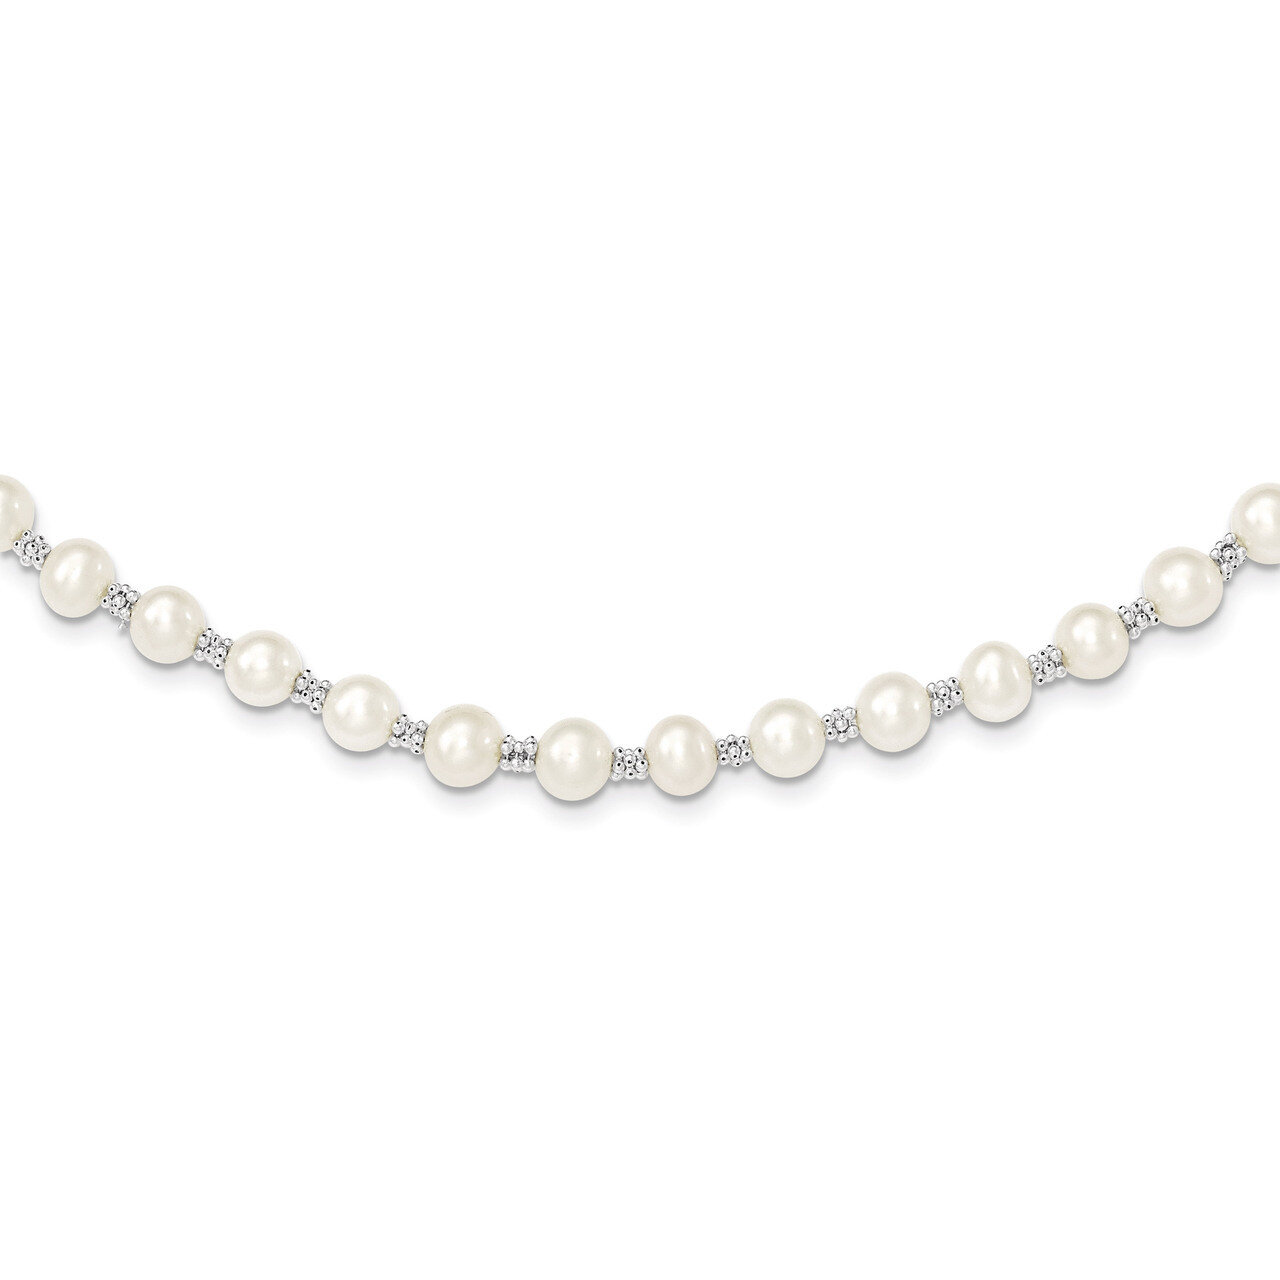 16 Inch White Cultured Pearl Necklace Sterling Silver QH1084-16